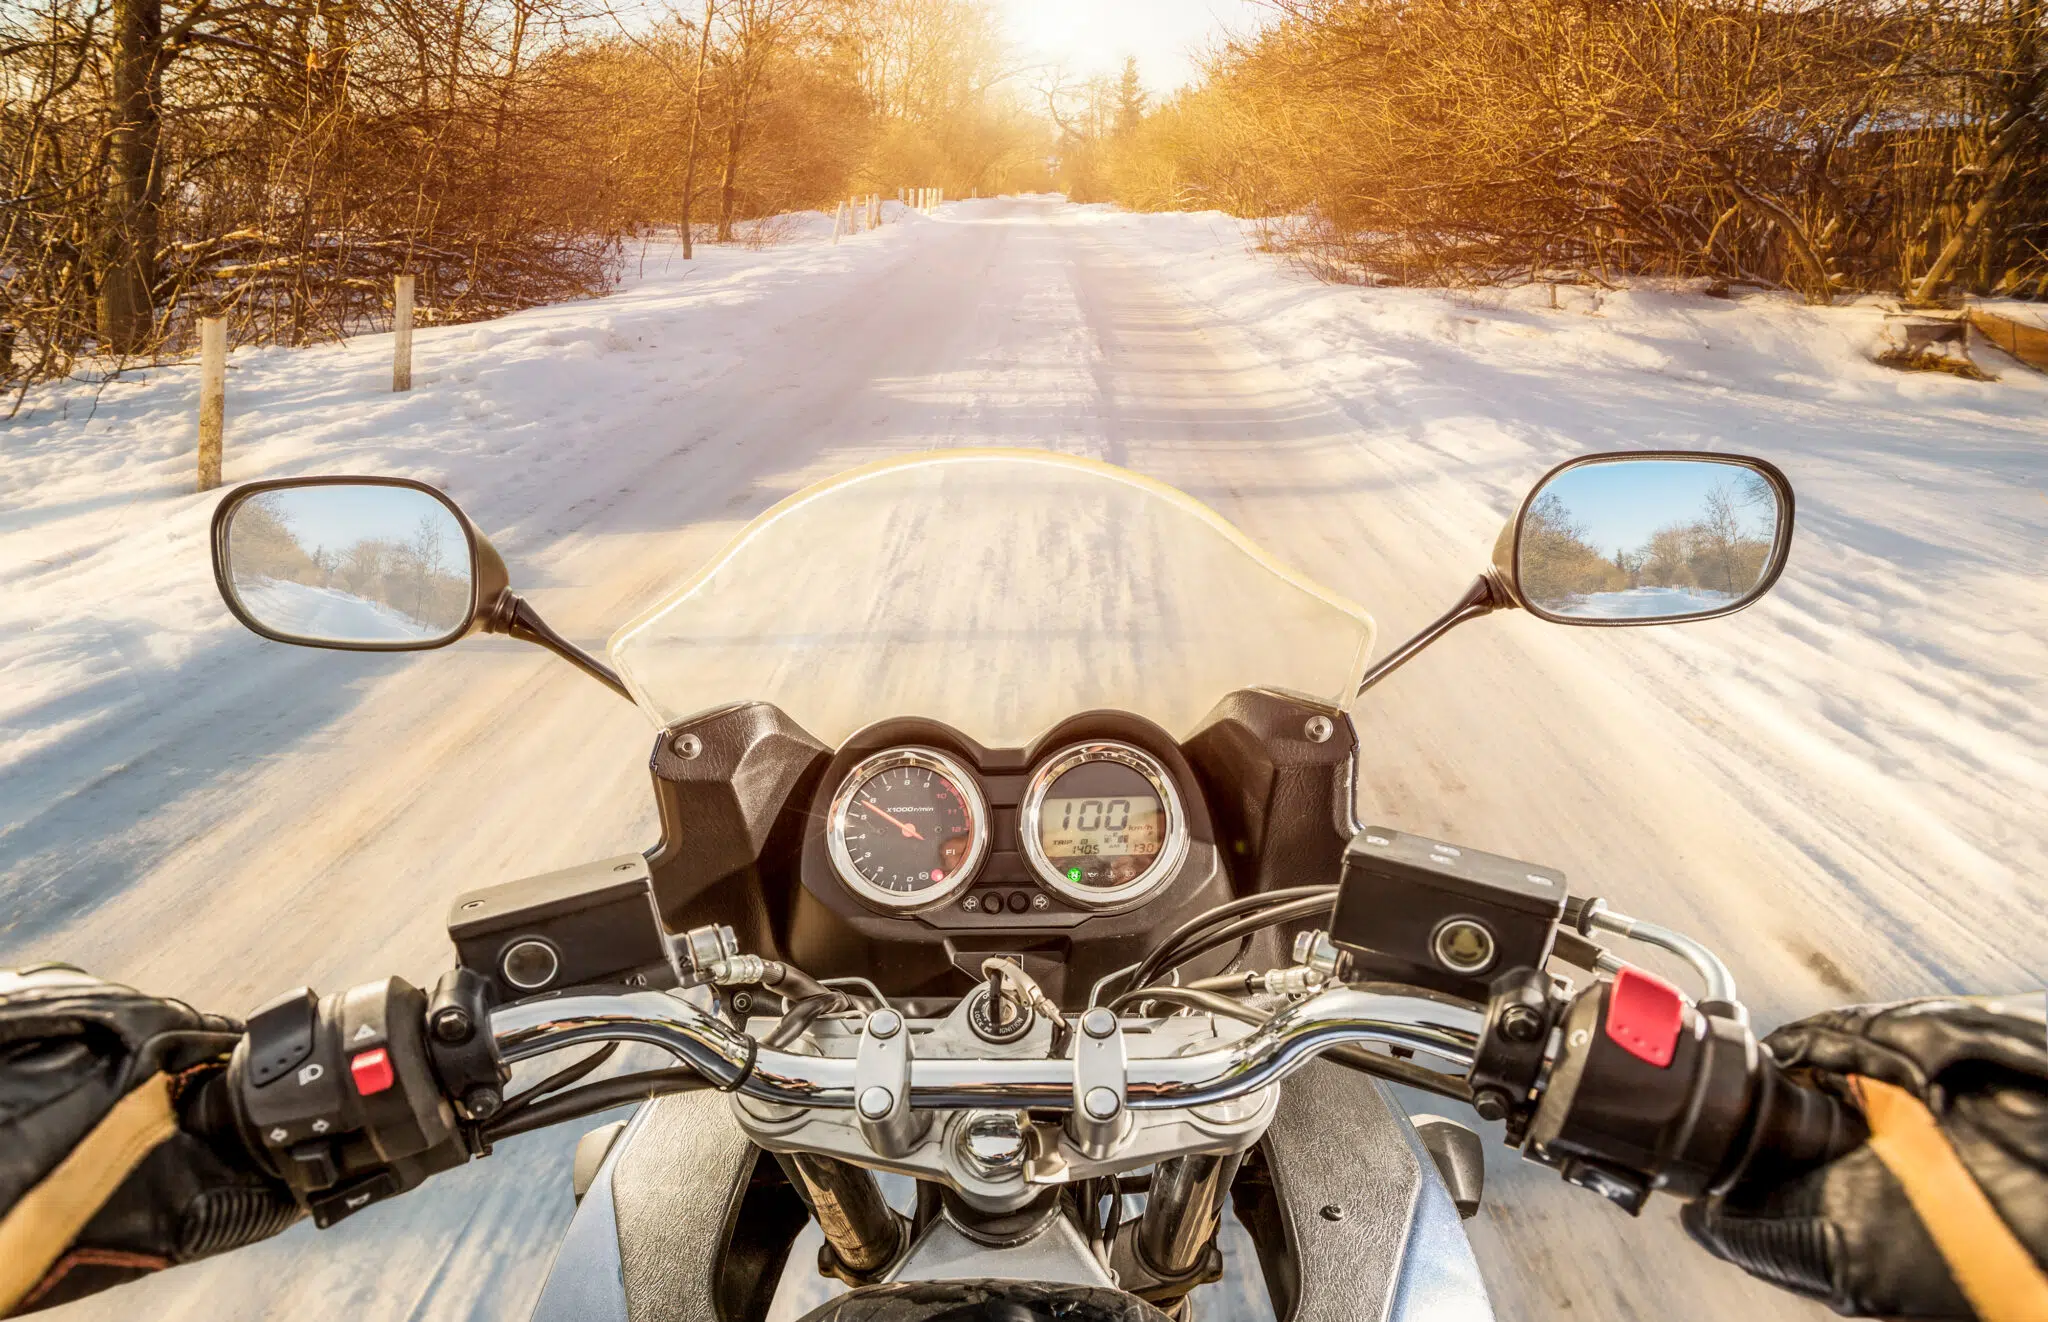 From the view of a motorcycle driver, a winter road covered in snow and the dashboard of a motorcycle.